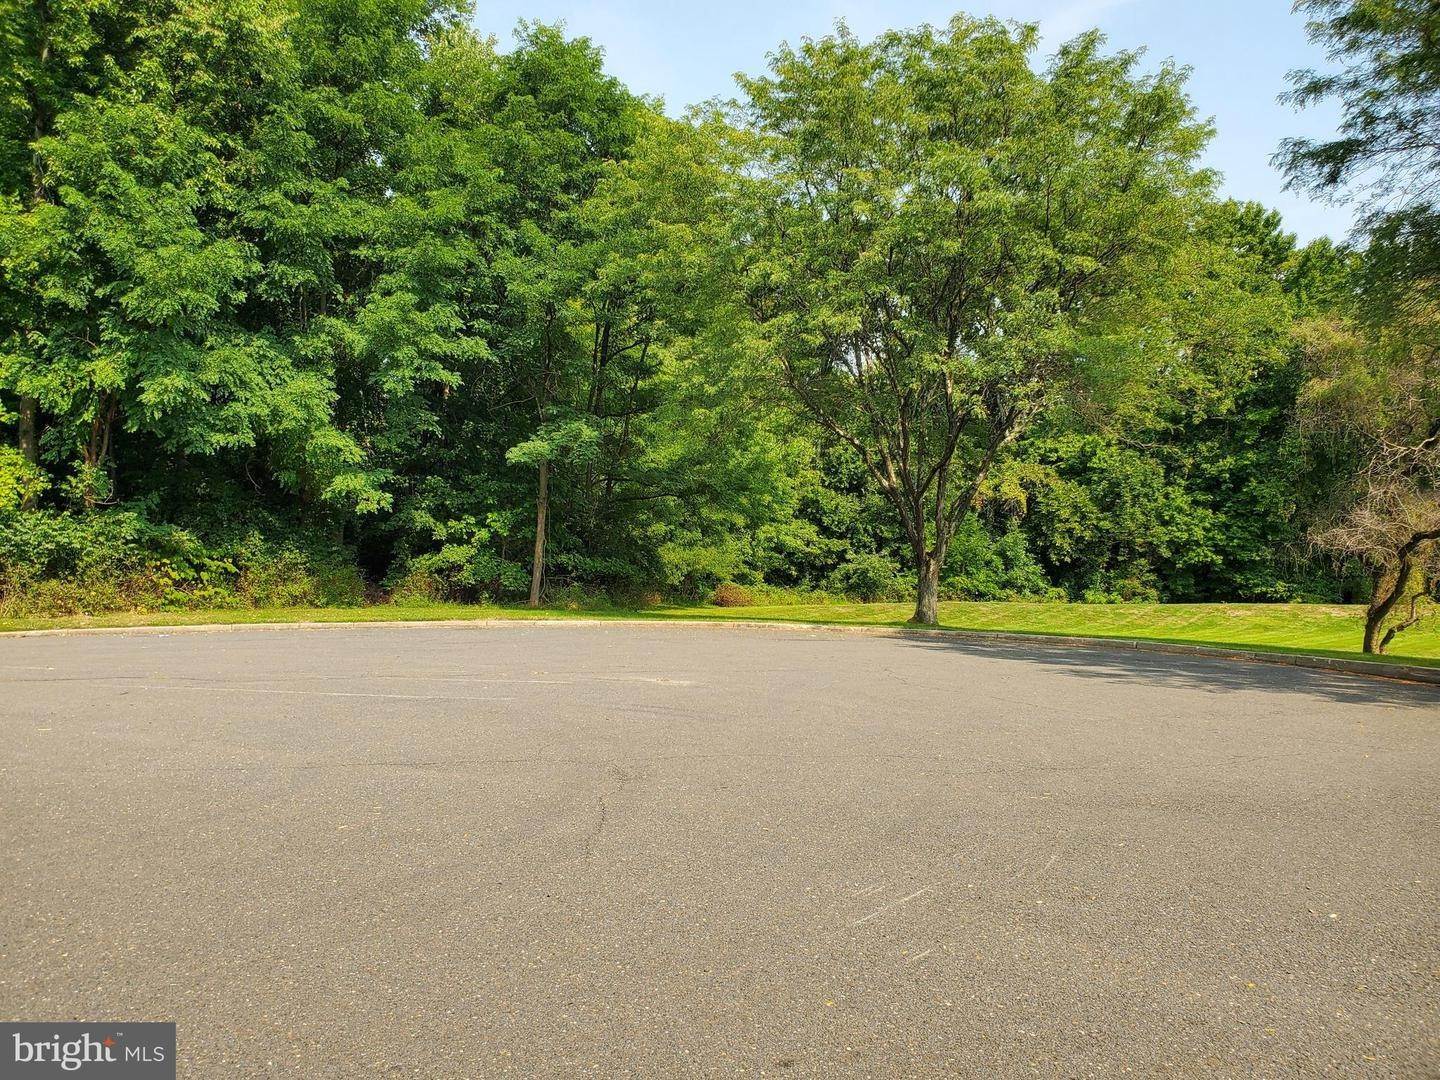 2. Land for Sale at 4 LUDLOW Drive Ewing, New Jersey 08638 United States